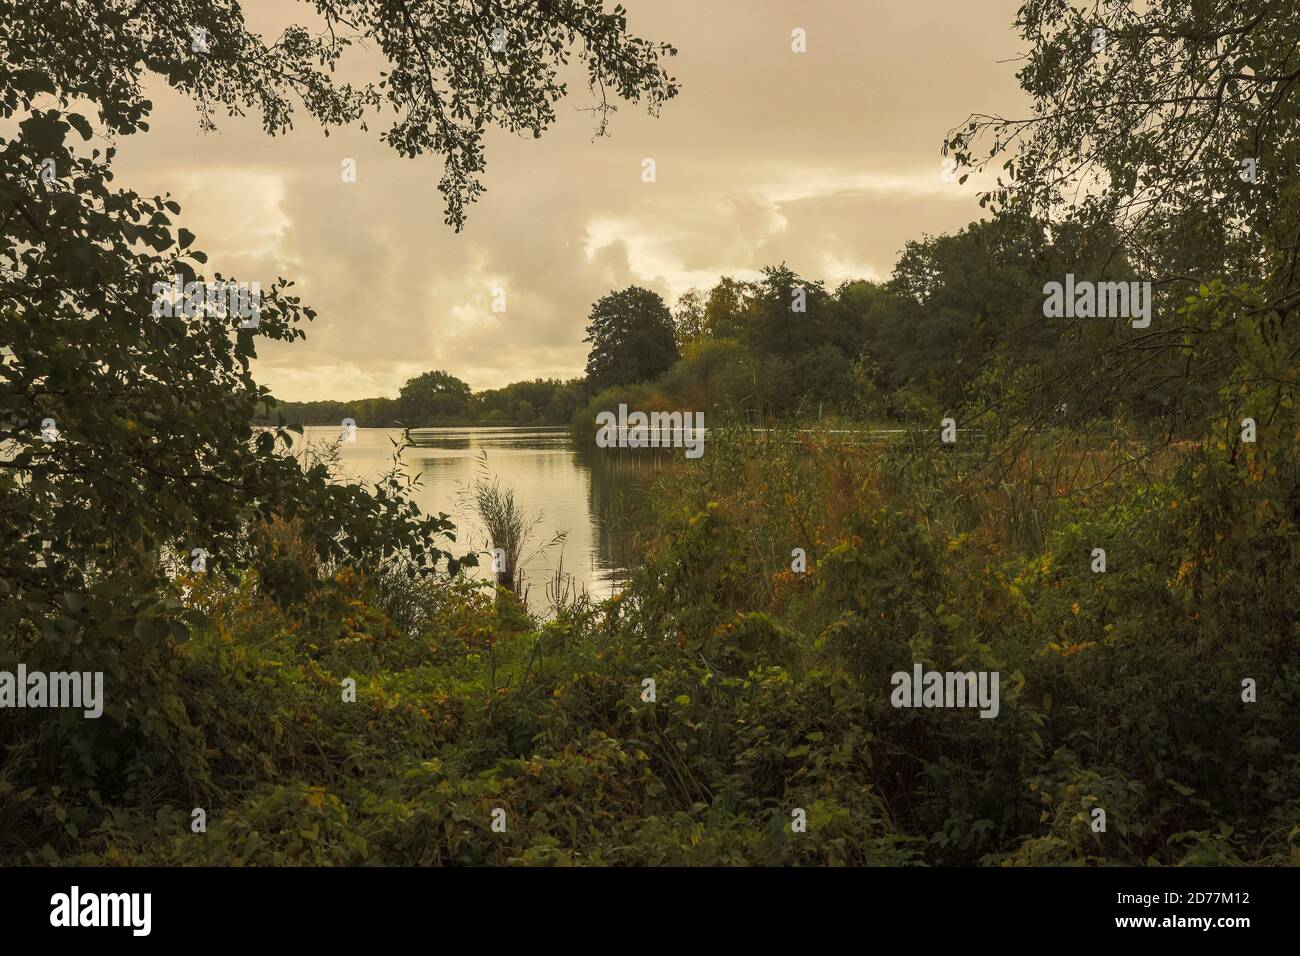 The Kellersee showed itself in a melancholy mood on this October day. Stock Photo